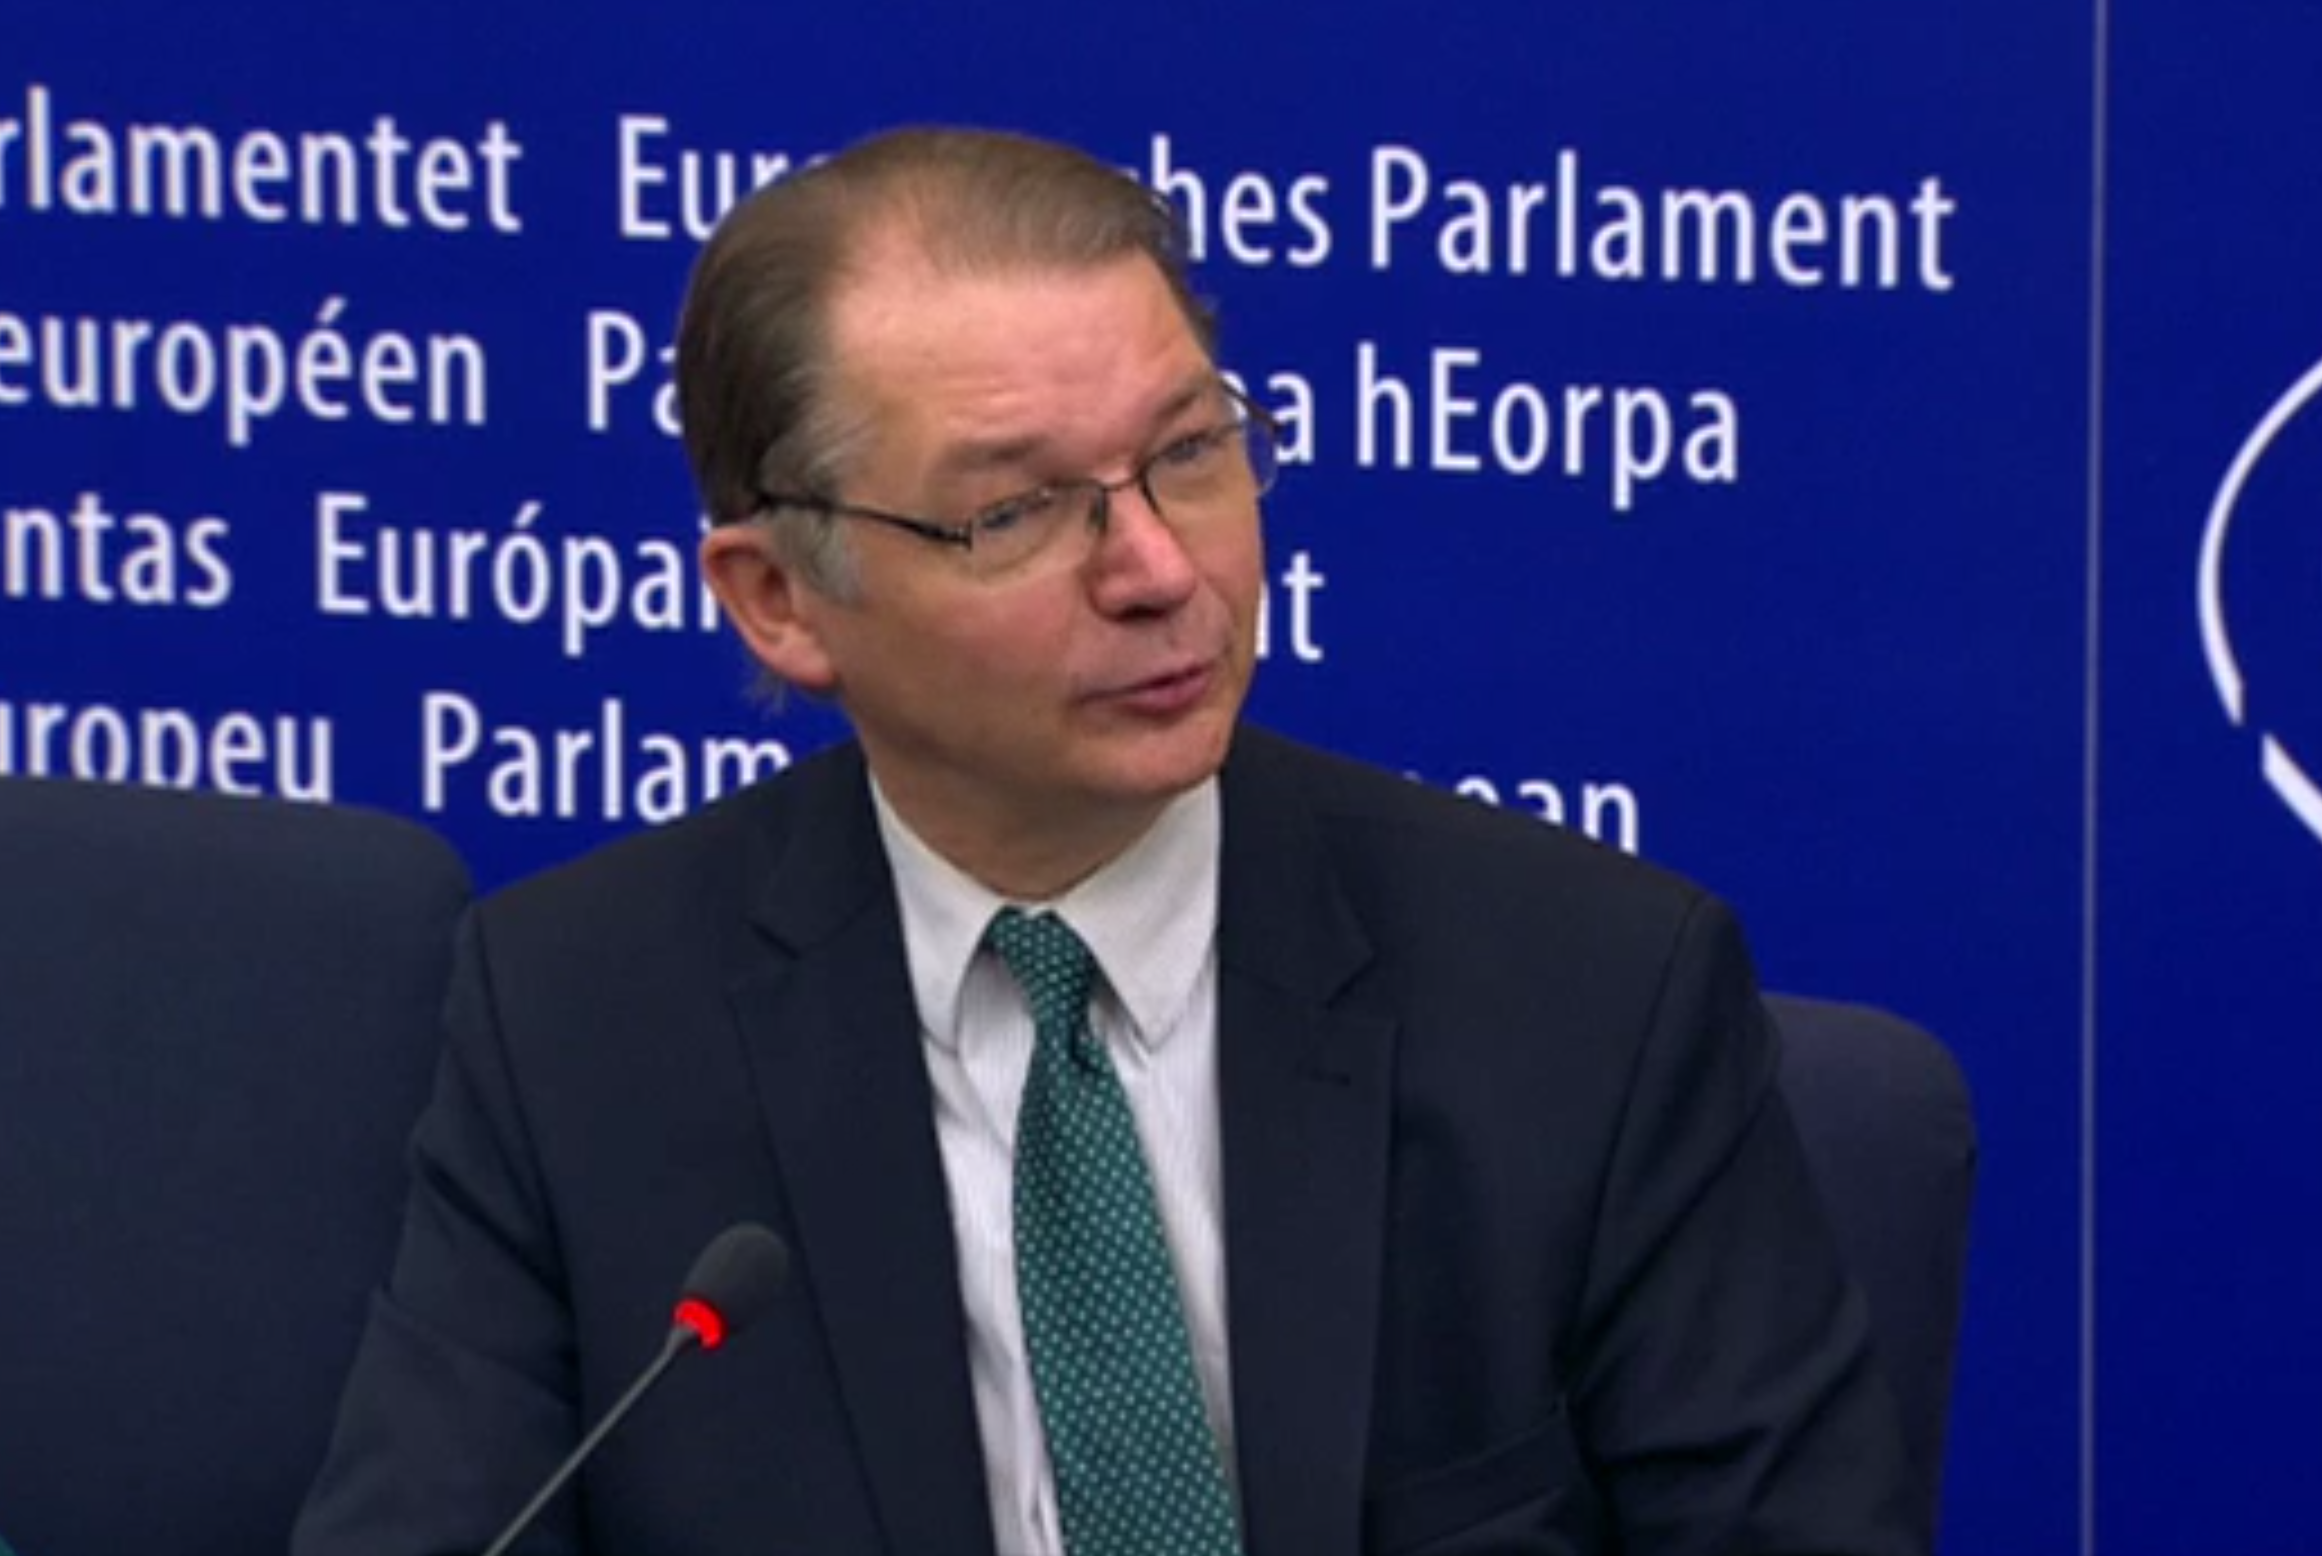 Philippe Lamberts is a member of the key European Parliament steering group